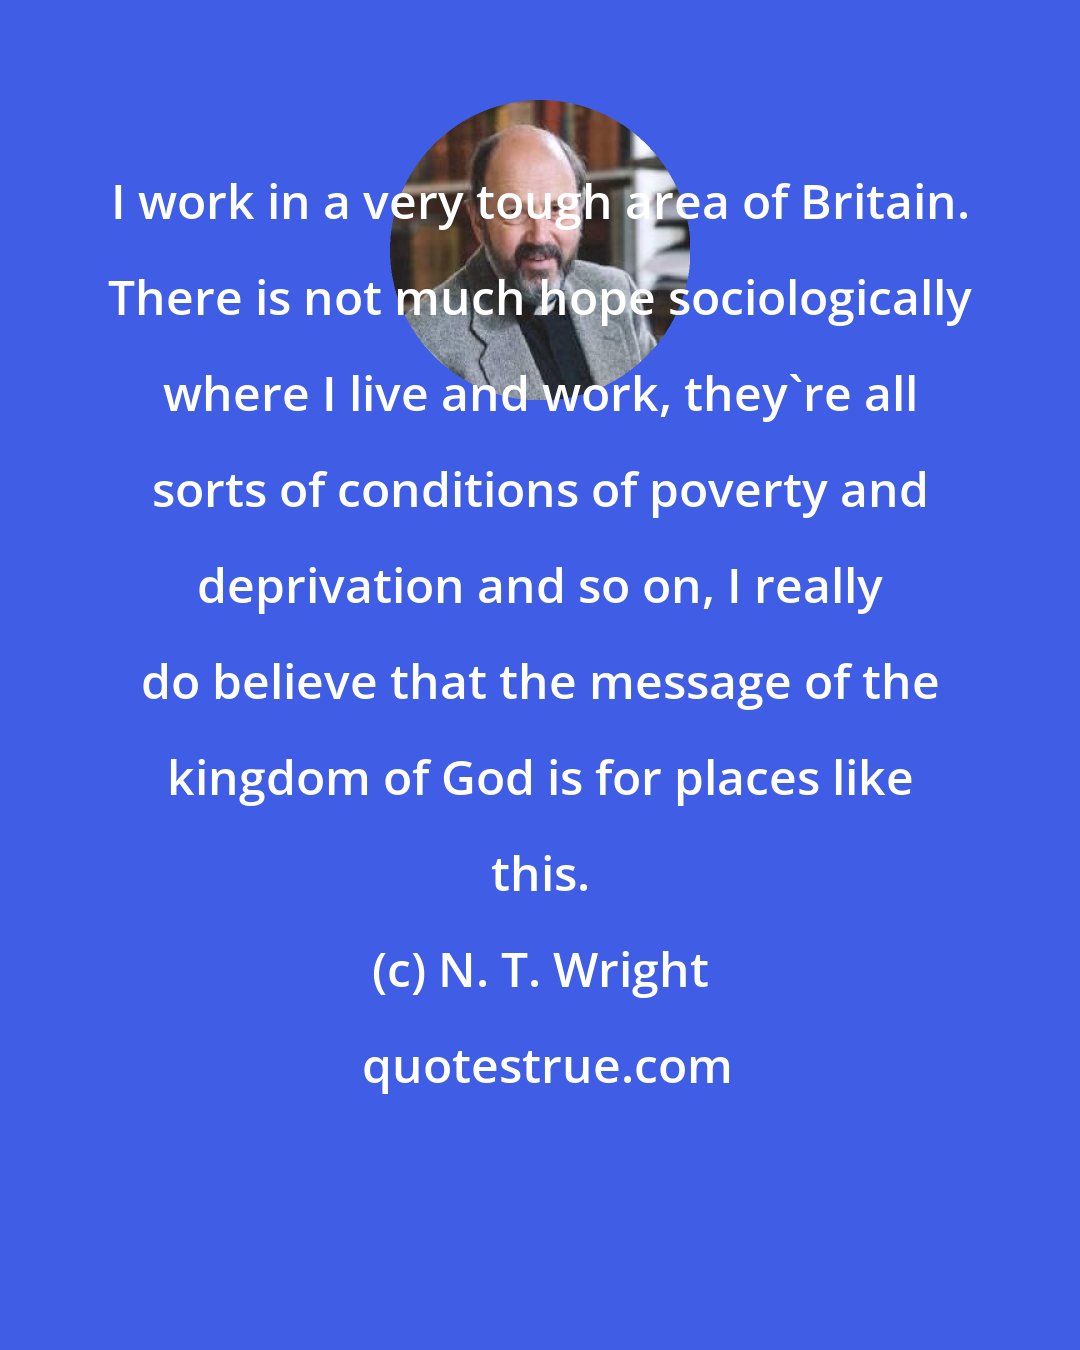 N. T. Wright: I work in a very tough area of Britain. There is not much hope sociologically where I live and work, they're all sorts of conditions of poverty and deprivation and so on, I really do believe that the message of the kingdom of God is for places like this.